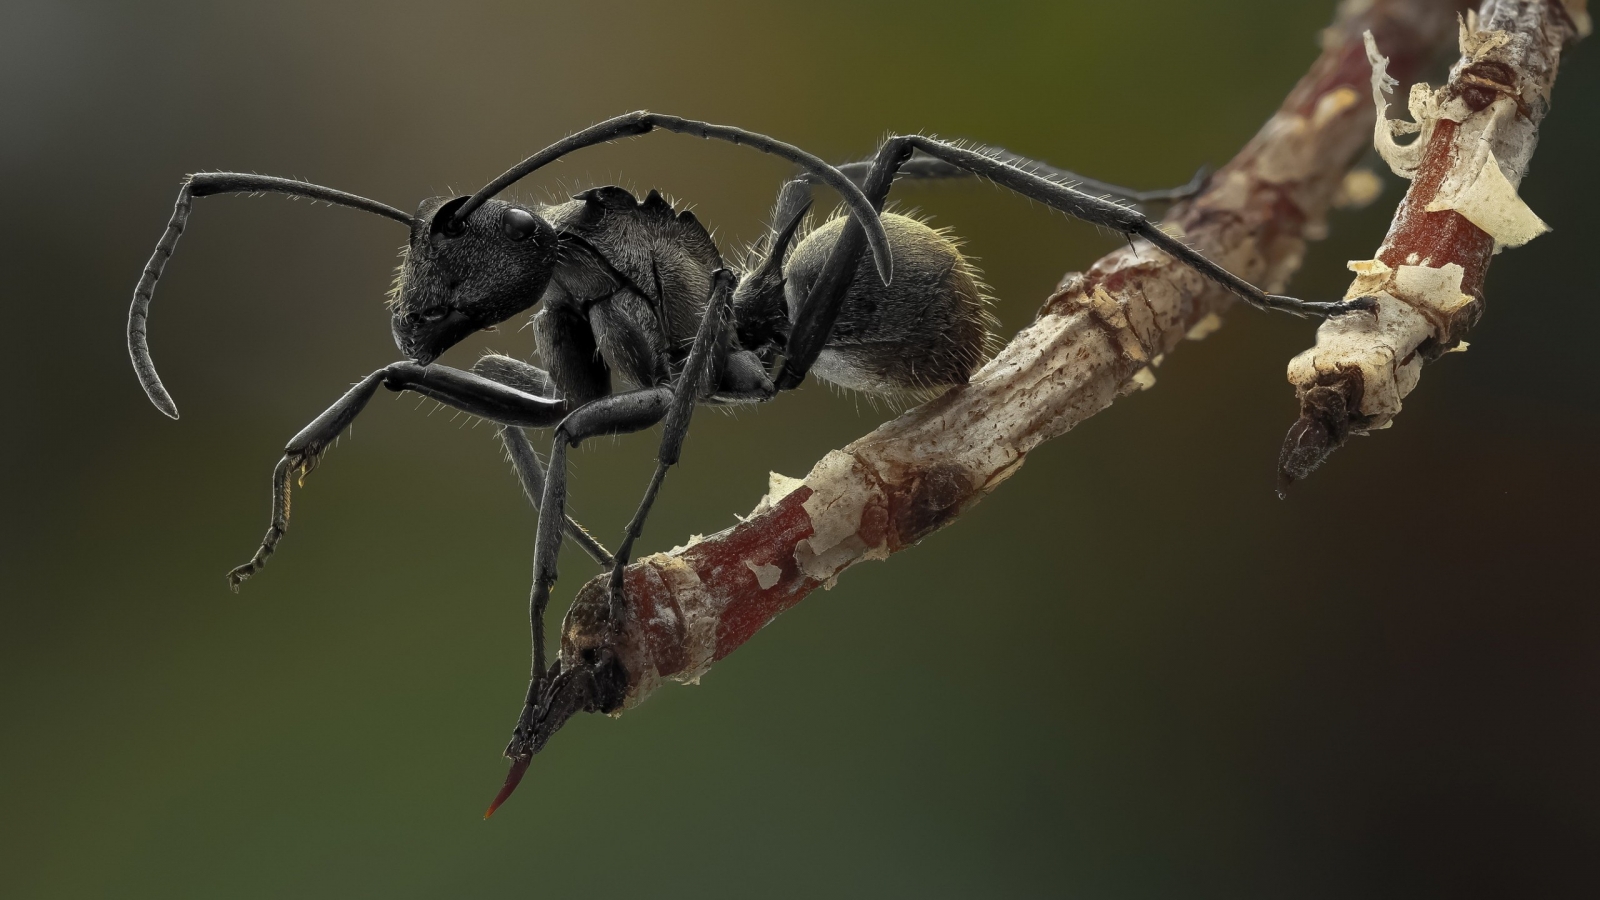 Ant Macro Photography for 1600 x 900 HDTV resolution